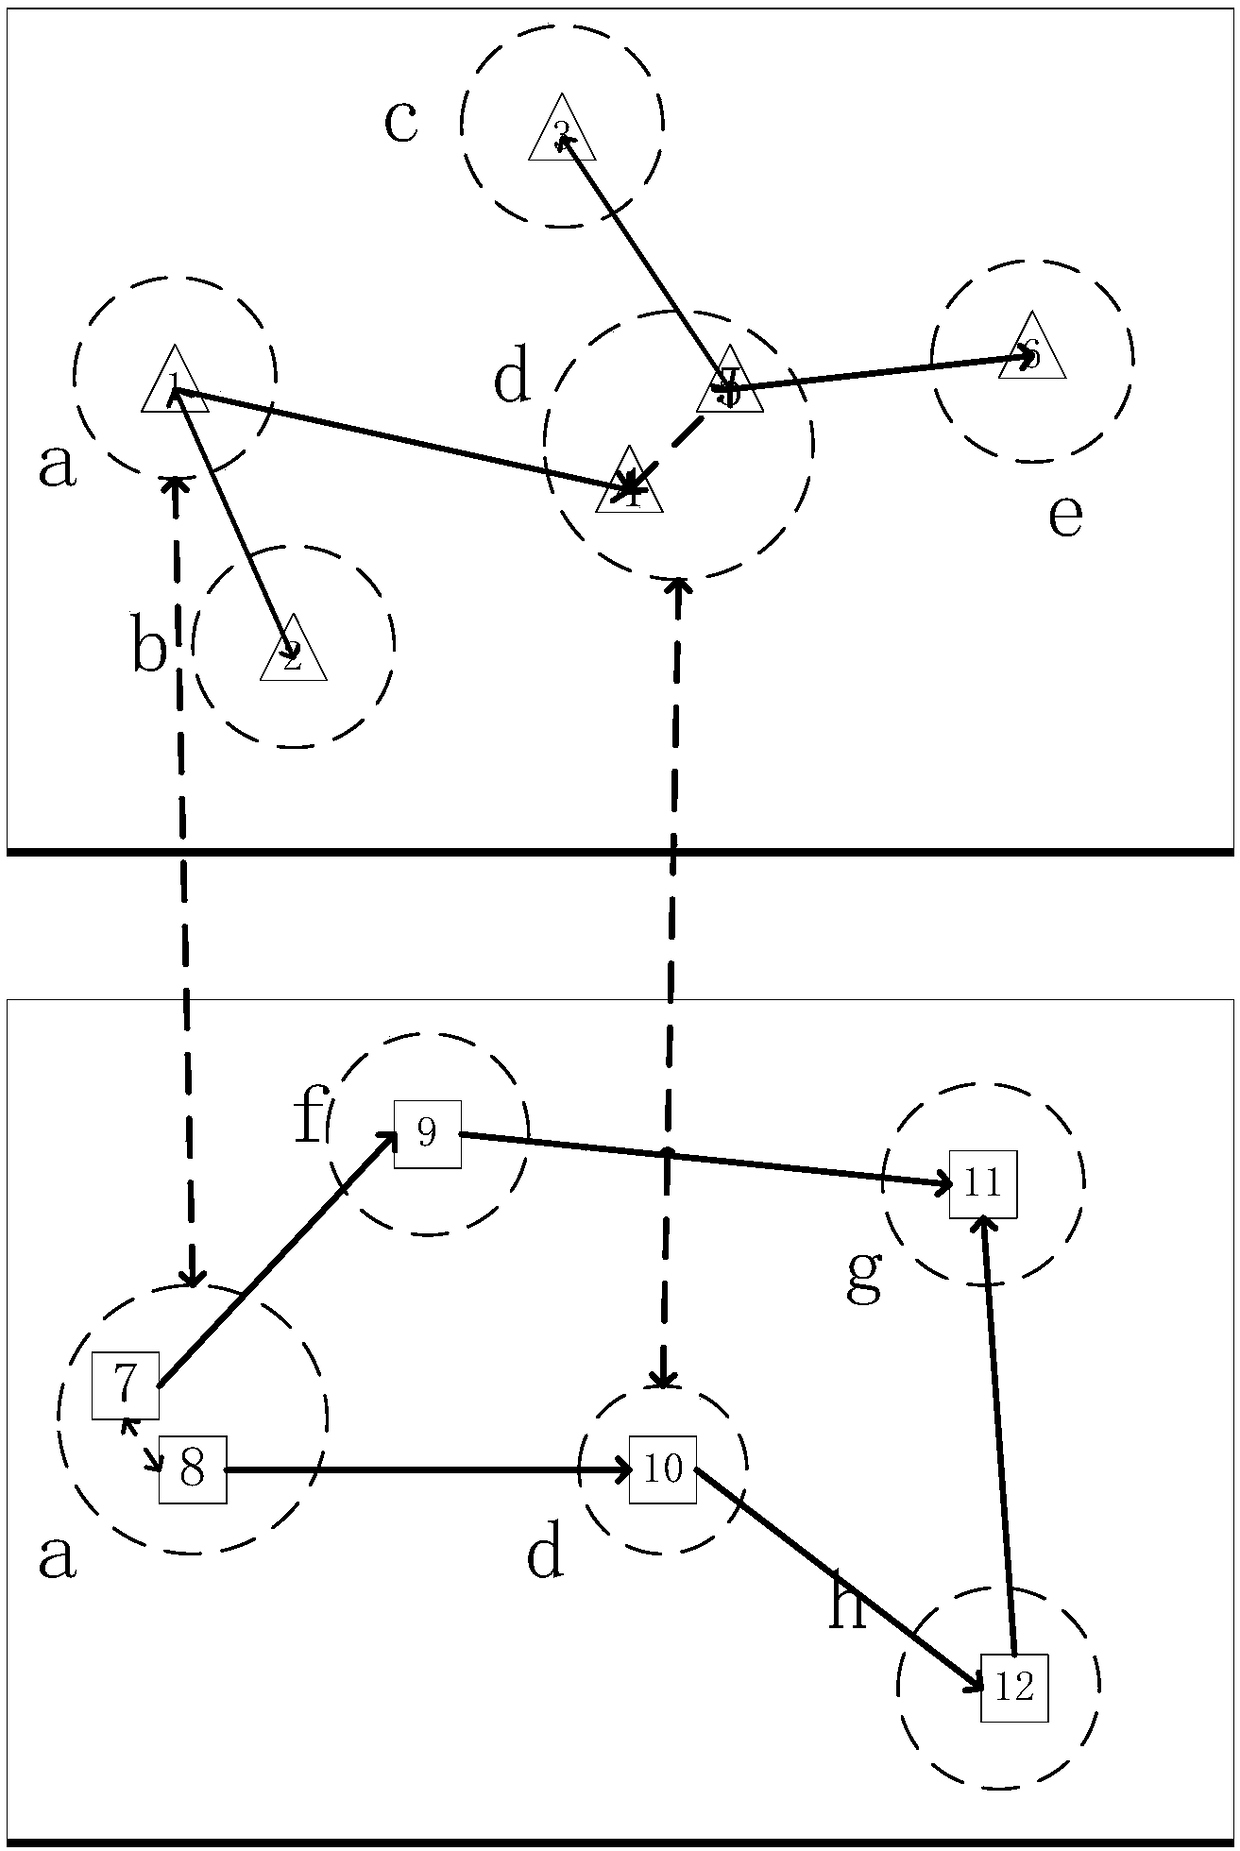 A method for selecting a hub node of an integrated traffic network